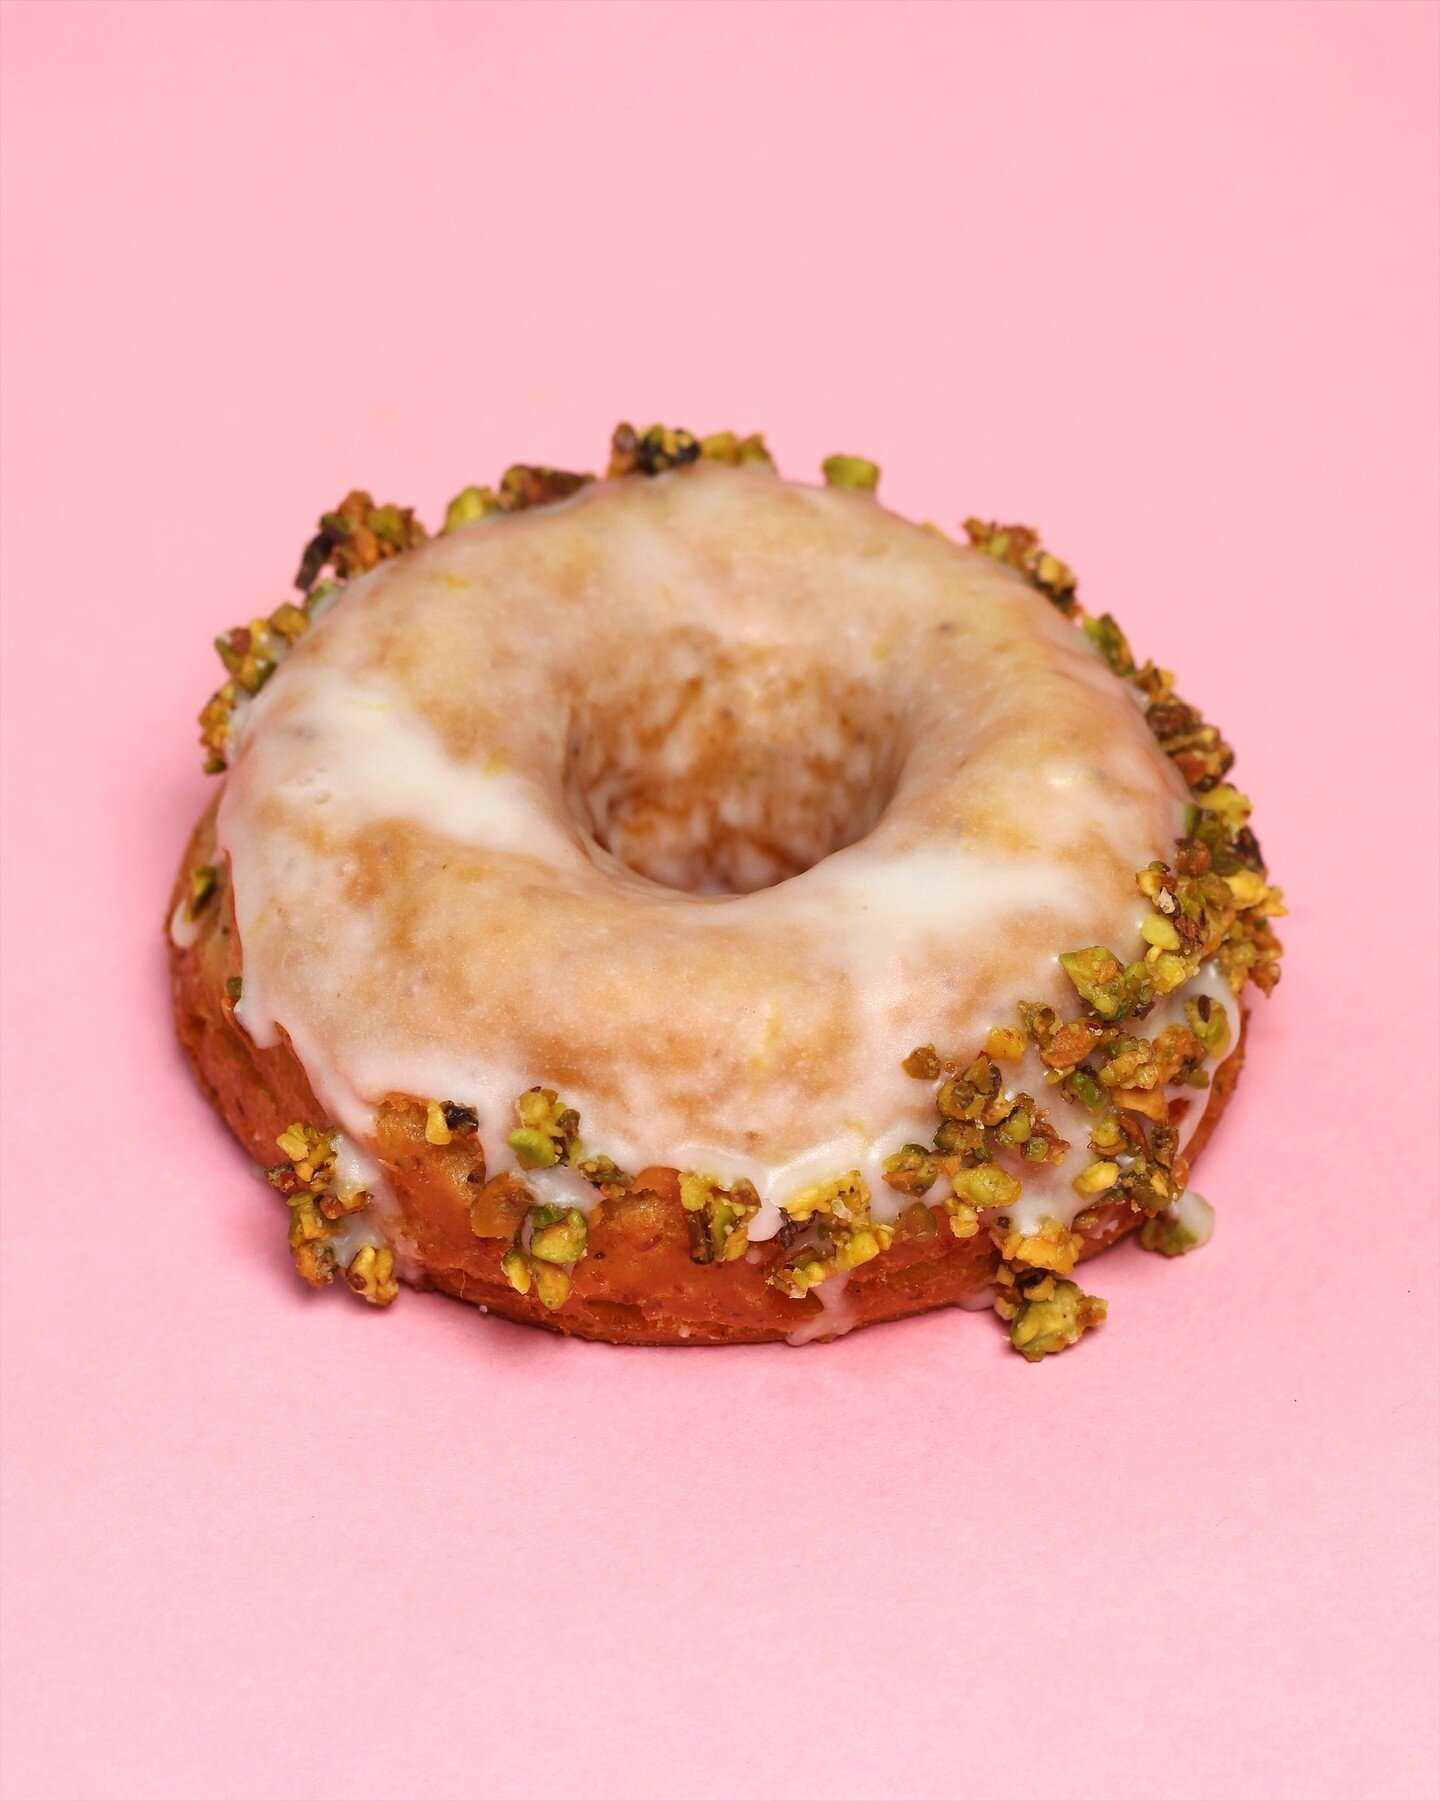 Enjoy a little salty-sweet action today. Our Lemon Pistachio Donut is a lemon zest and pistachio flour dough dipped in a tart lemon glaze and rolled in toasted lightly salted pistachios.⁠
&bull;⁠
&bull;⁠
&bull;⁠
#dynamodonuts #sanfrancisco #sfeats #d